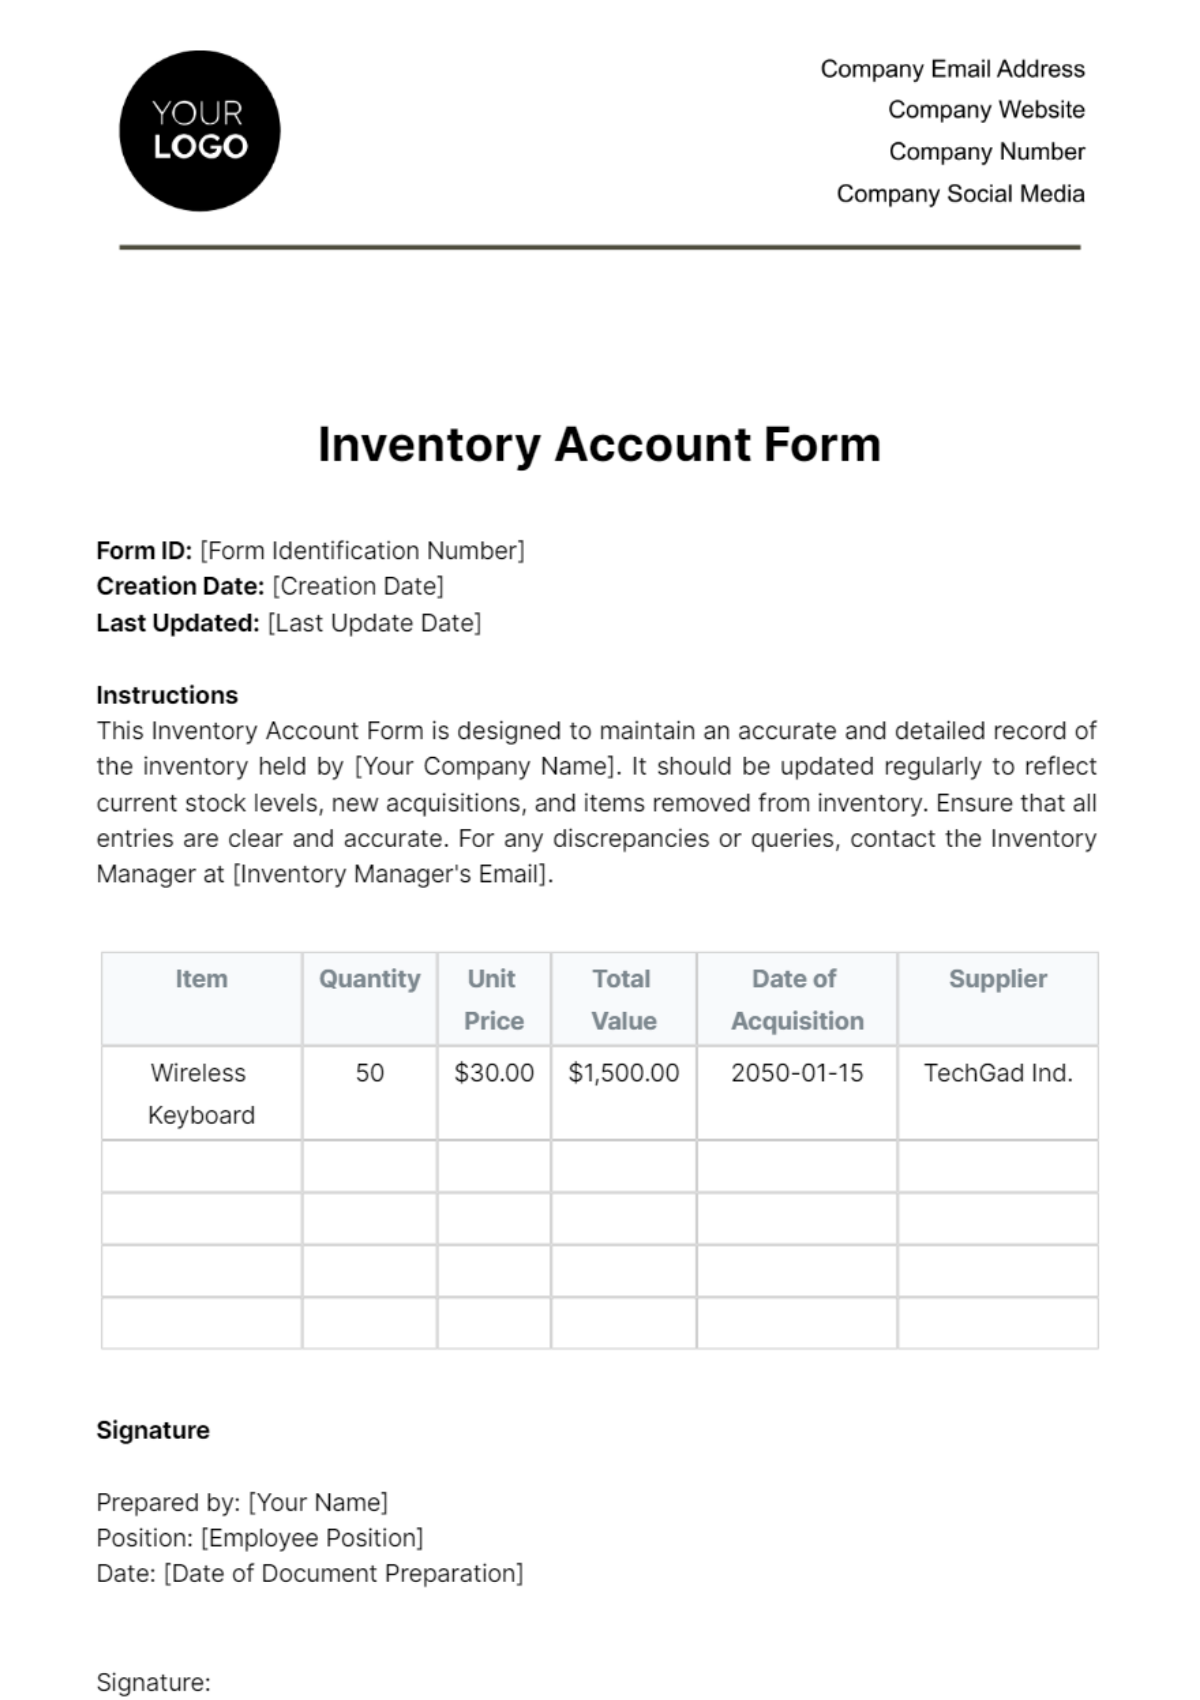 Inventory Account Form Template